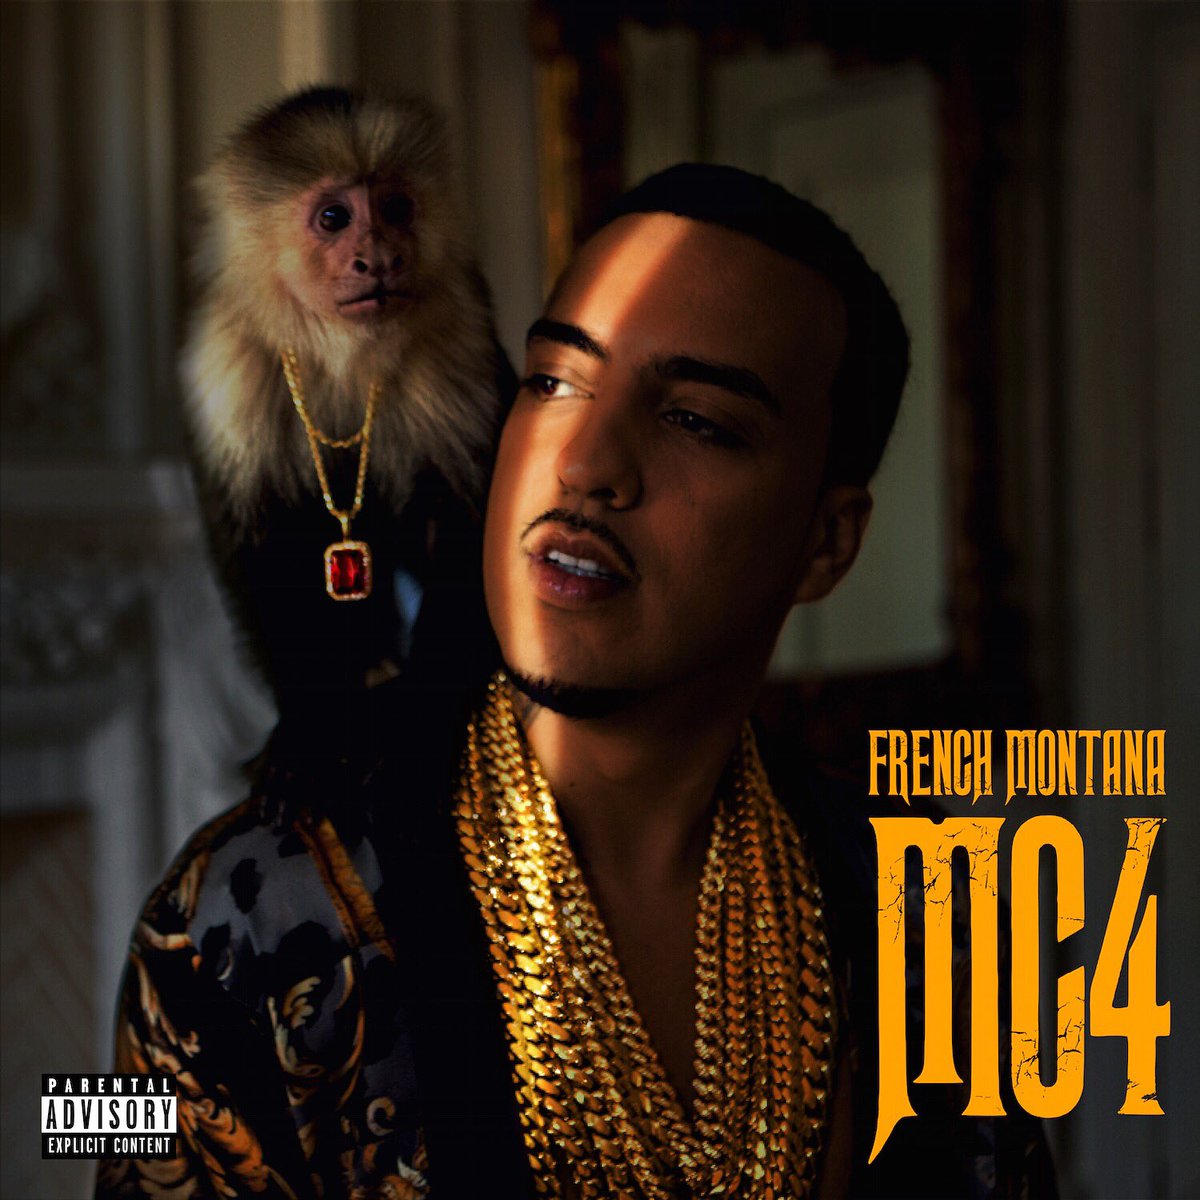 Muva & @frenchmontana have a collaboration coming soon! Make sure you get MC4 on Pre-Order https://t.co/gwNGQIIDUO https://t.co/8GMMlhqb1T